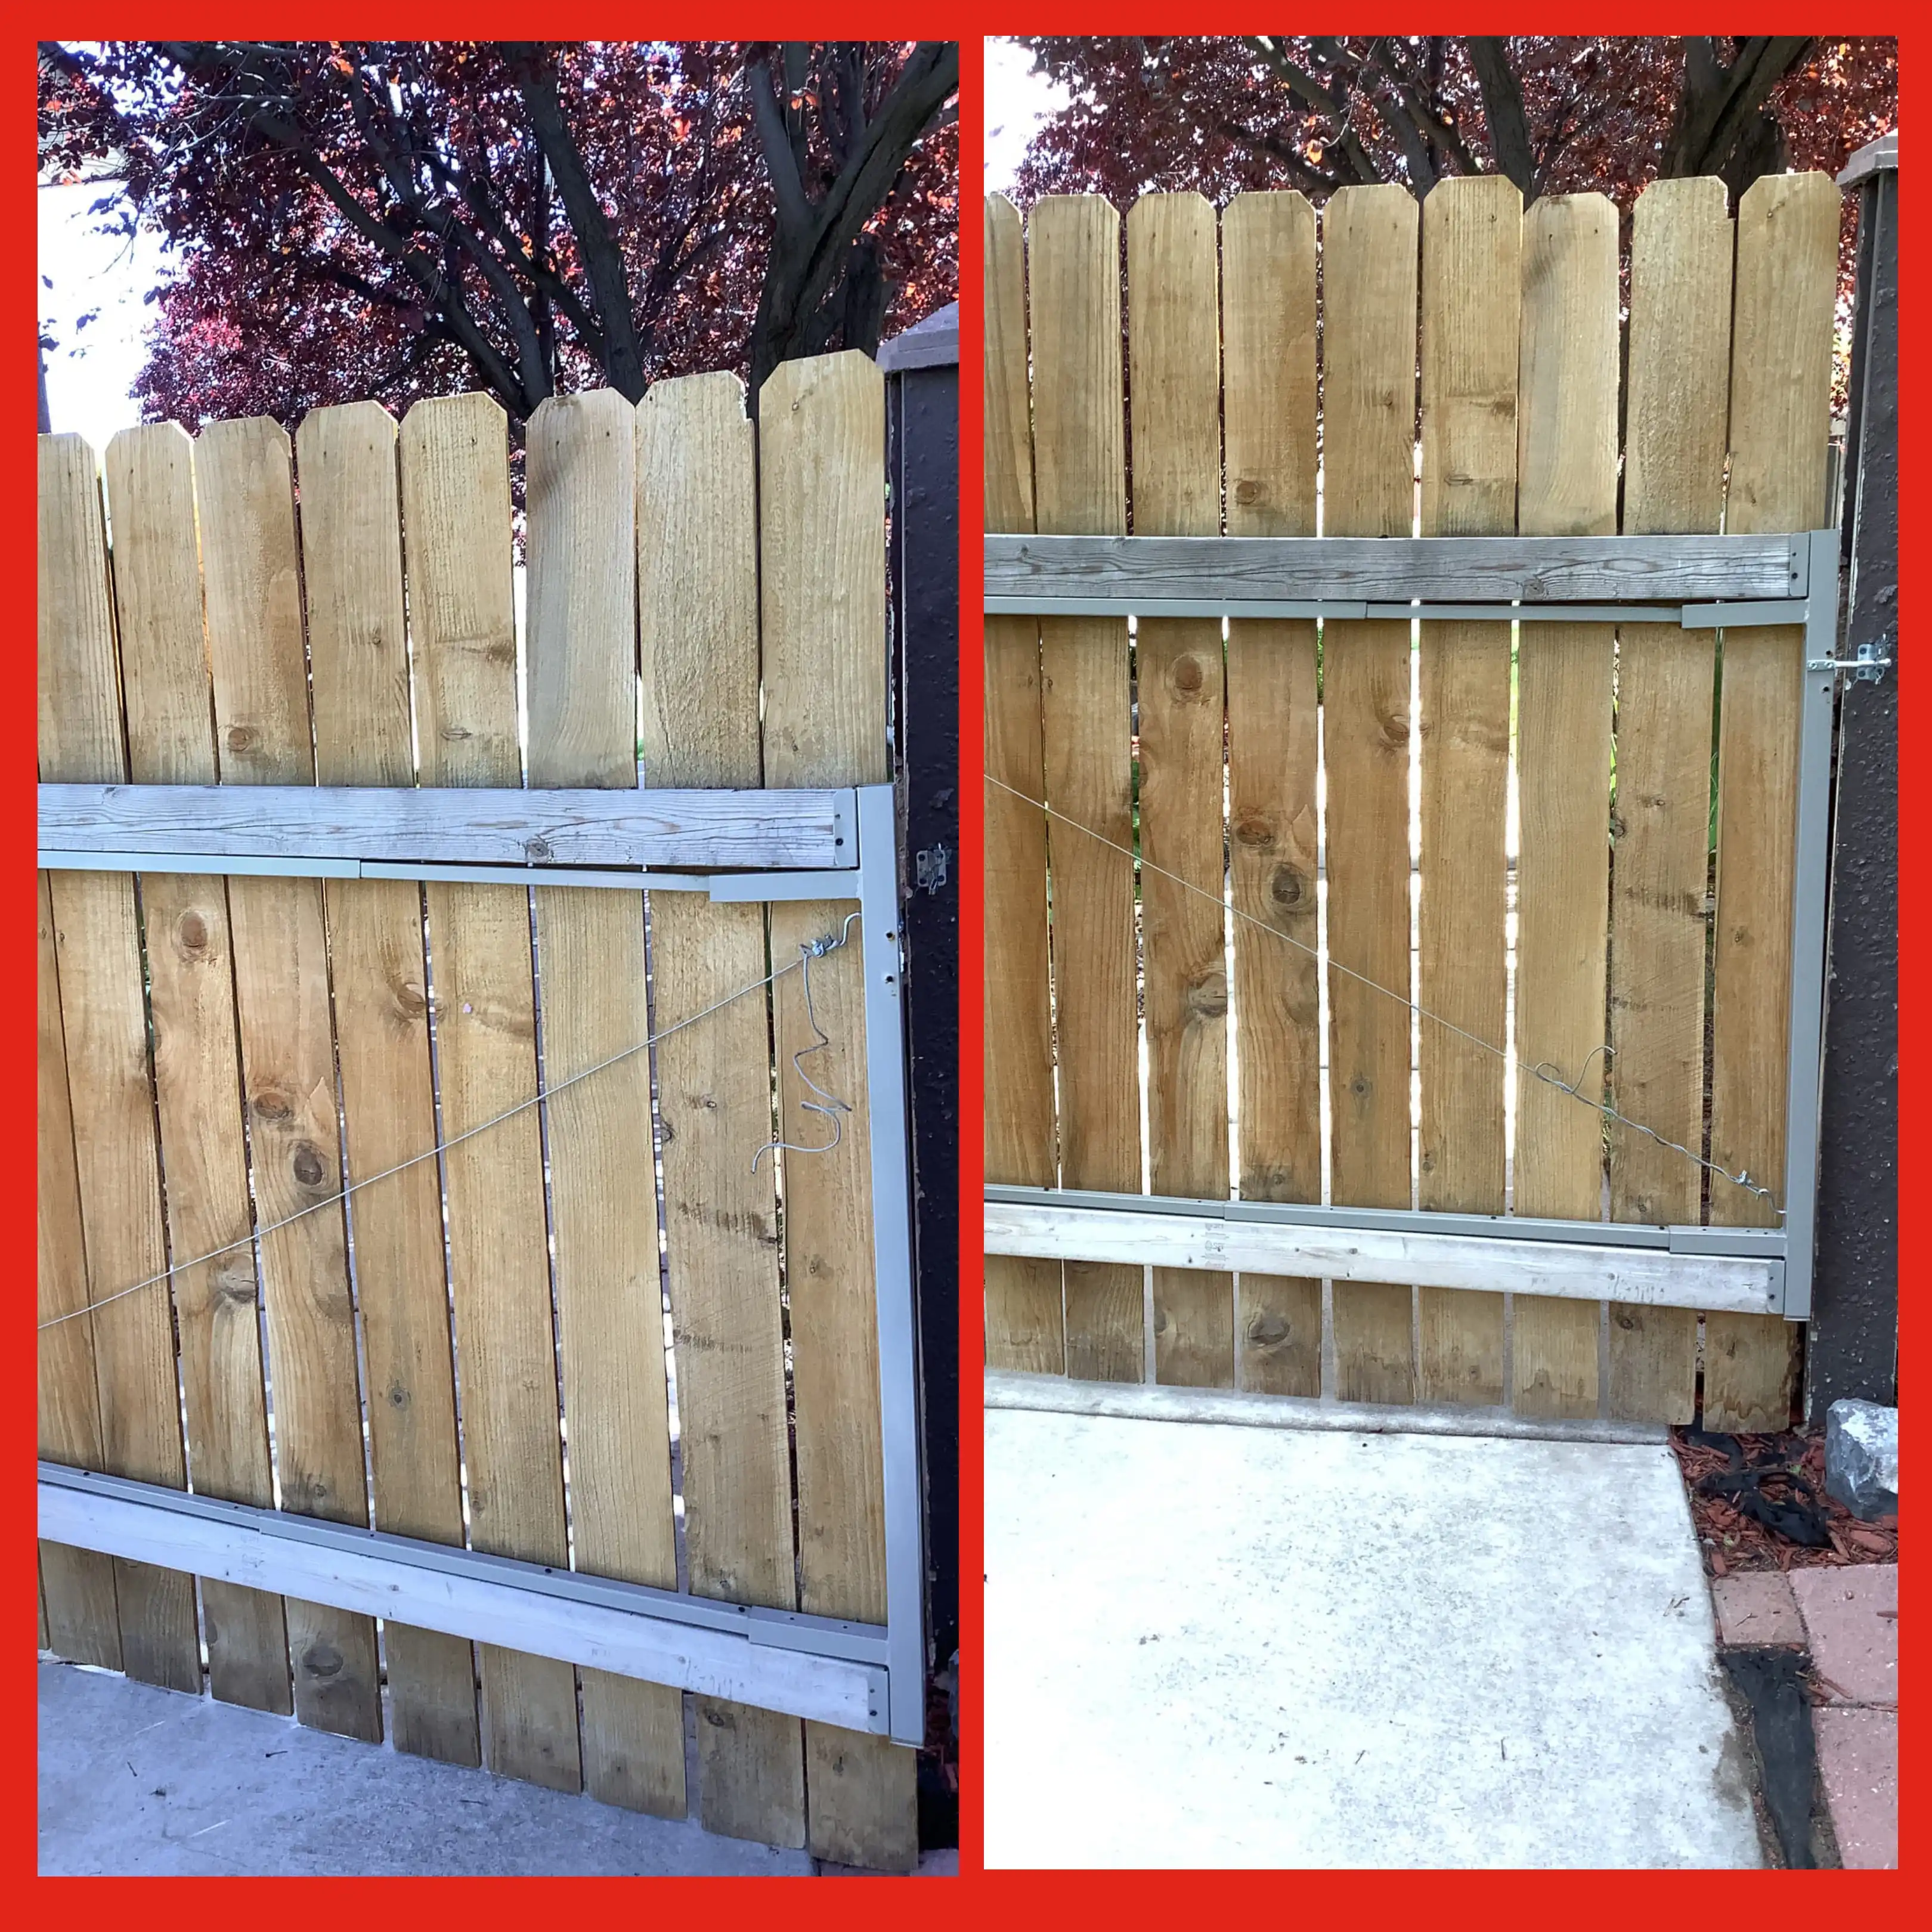 The gate on a residential fence before and after the locking mechanism has been replaced by Mr. Handyman.